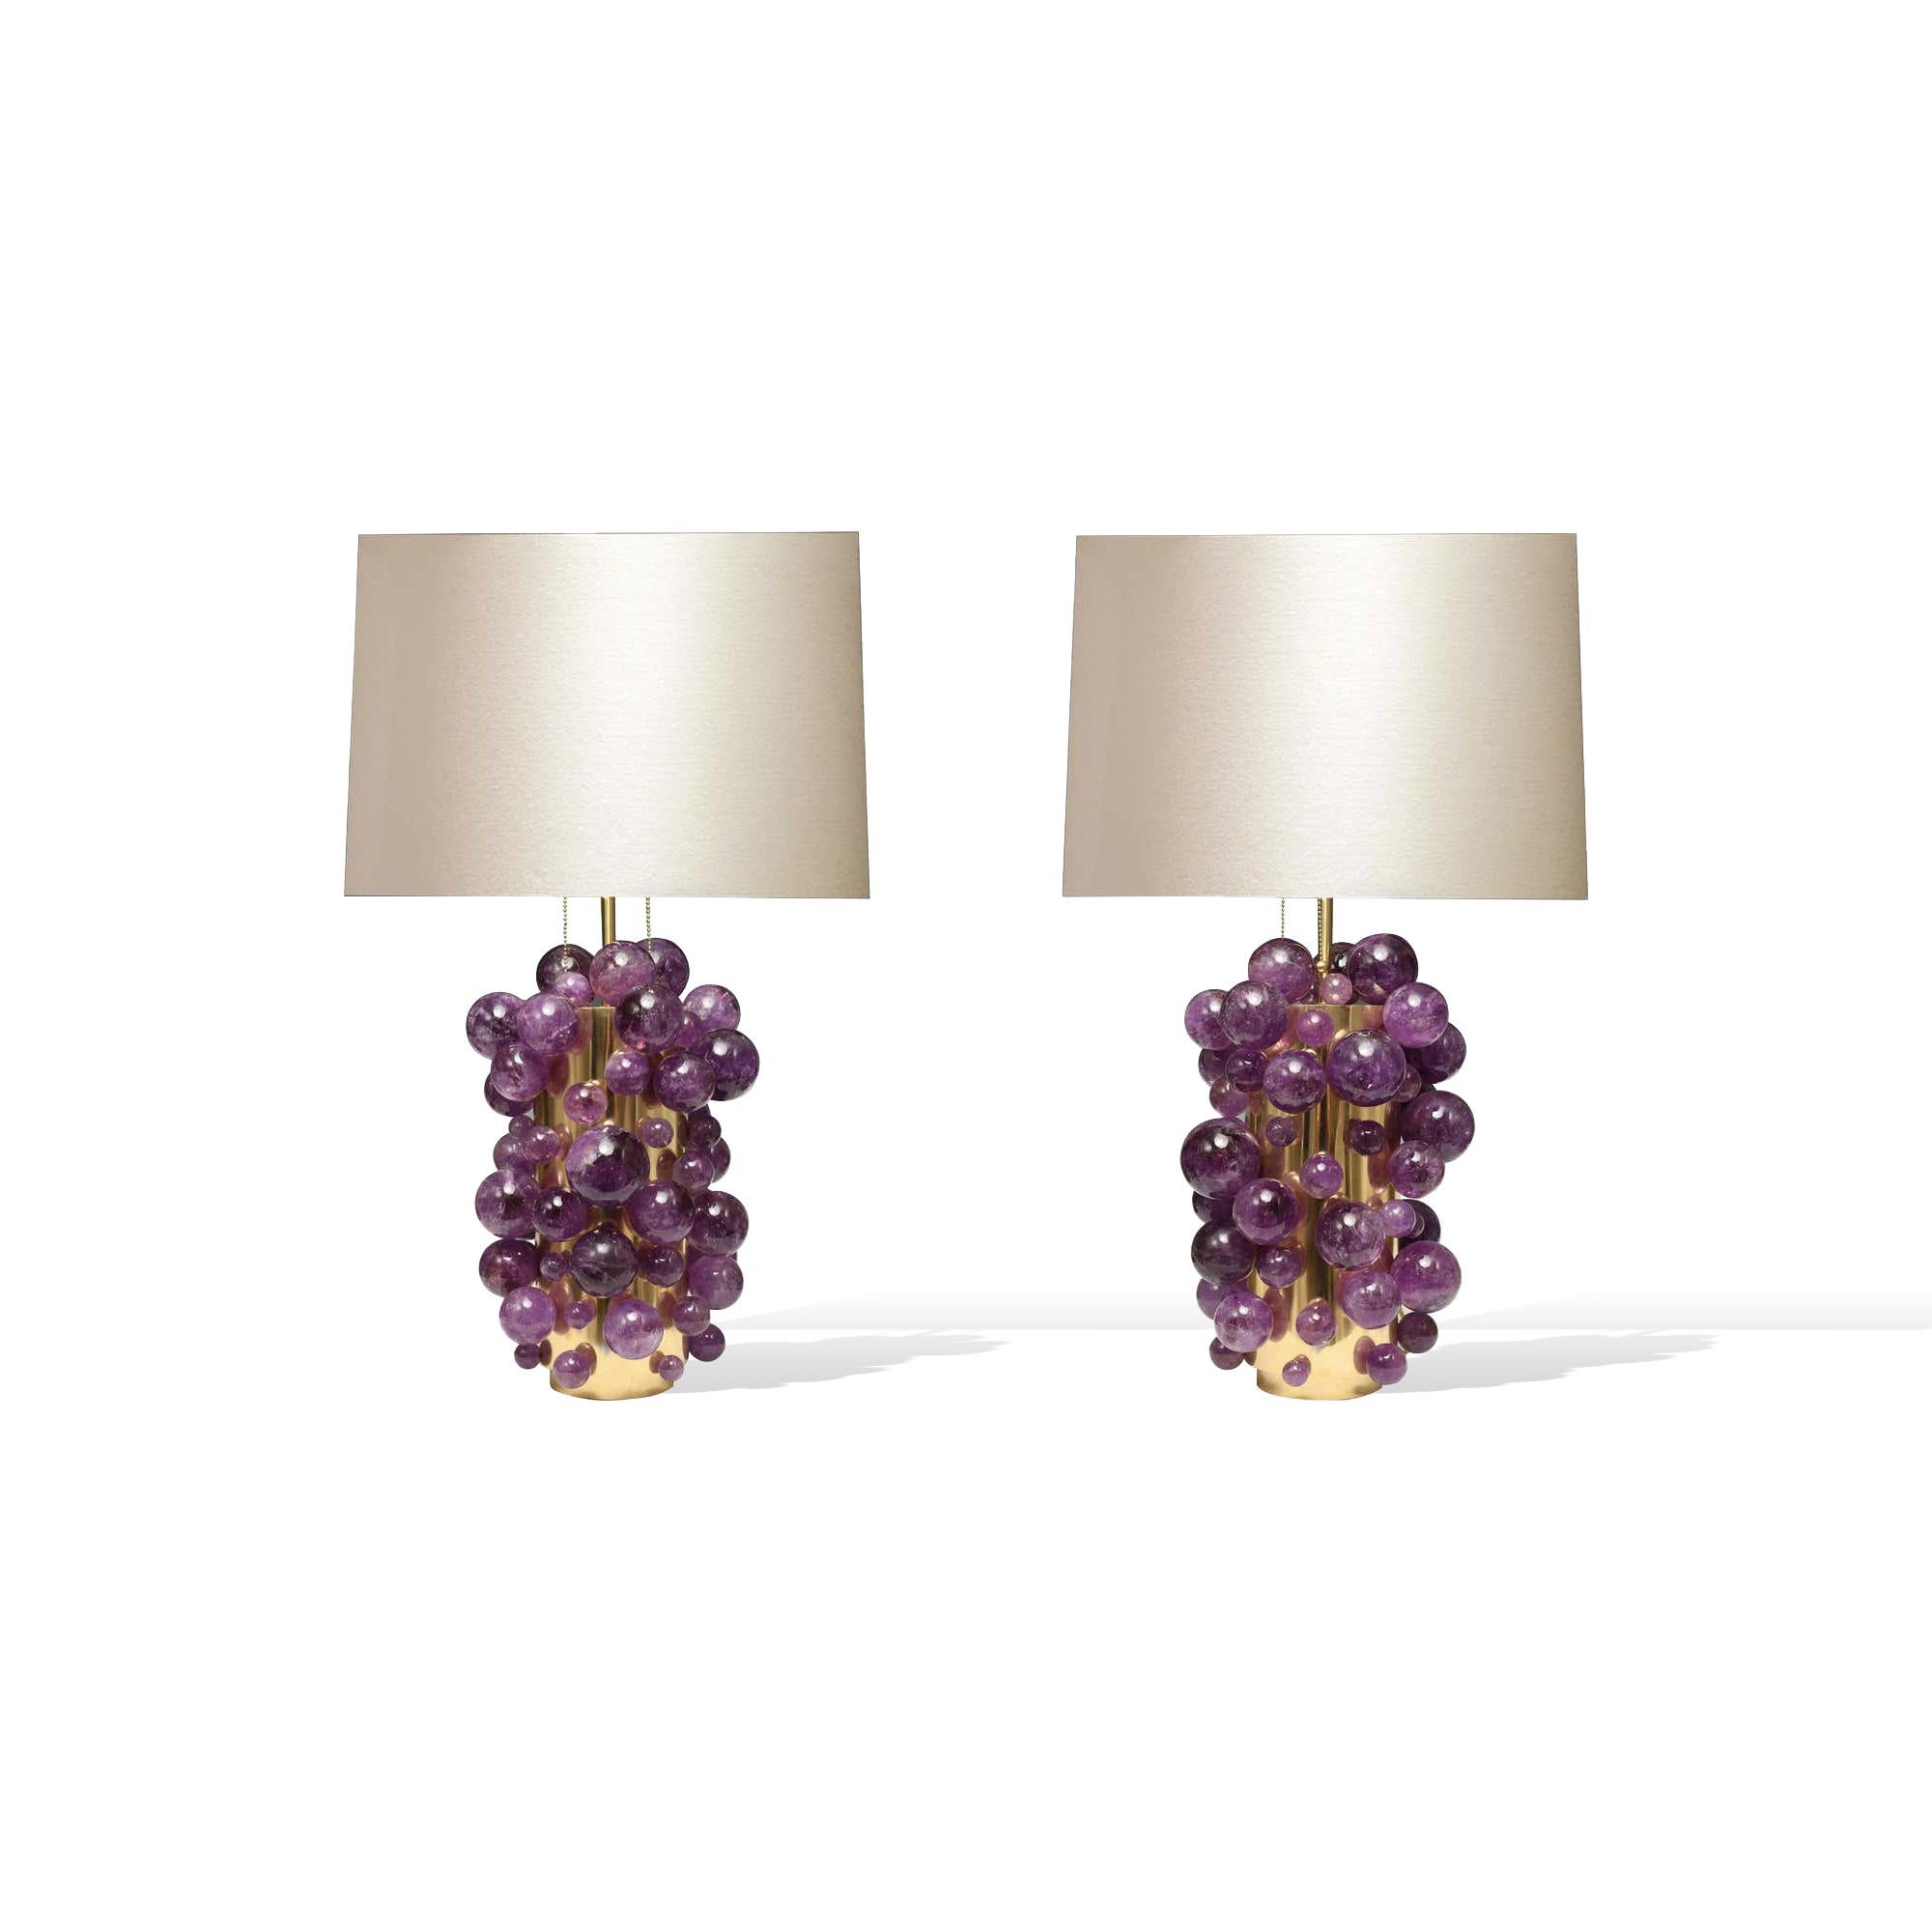 Pair of natural Amethyst rock crystal lamps with polish brass mount. Created by Phoenix gallery NYC.
To the top of the rock crystal is 17in/H.
Lampshade do not include.